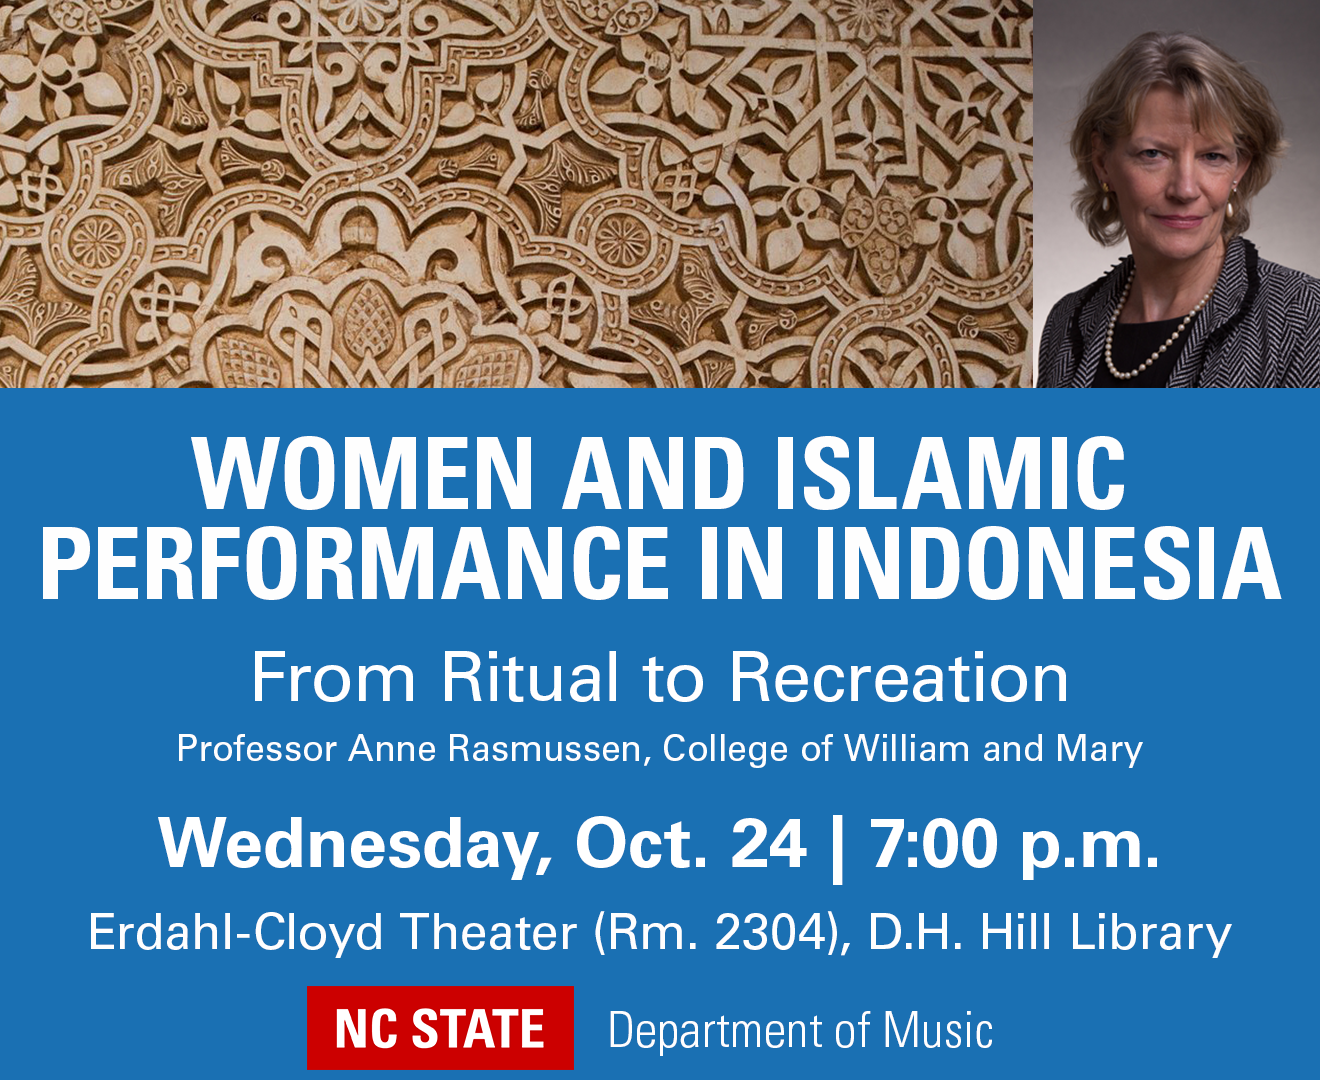 Women and Islamic Performance in Indonesia